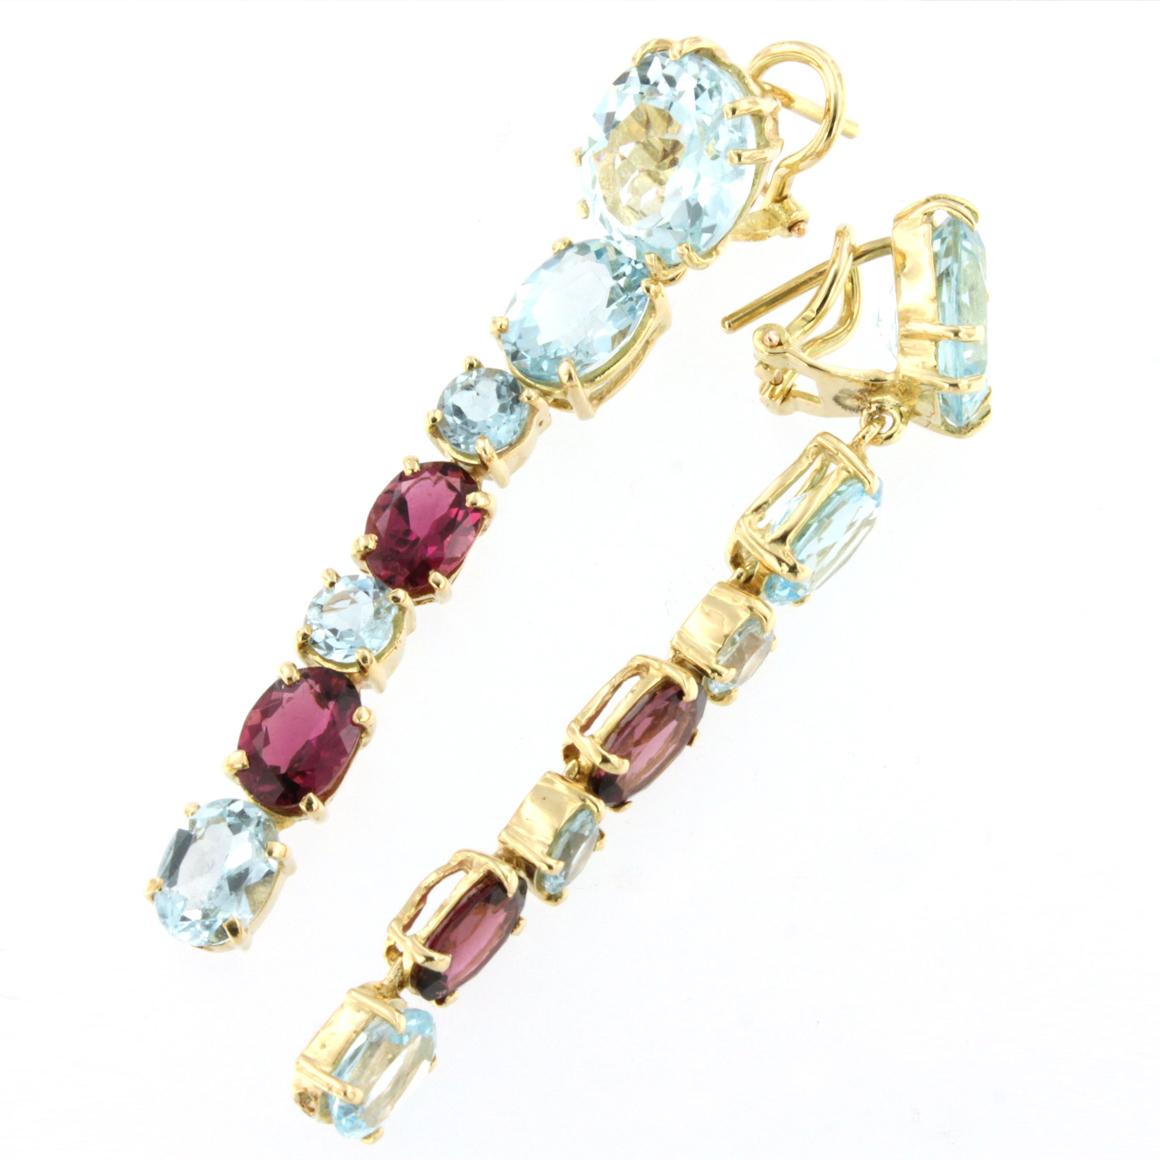 Modern 18k Rose Yellow Gold with Blue Topaz and Pink Tourmaline Earrings